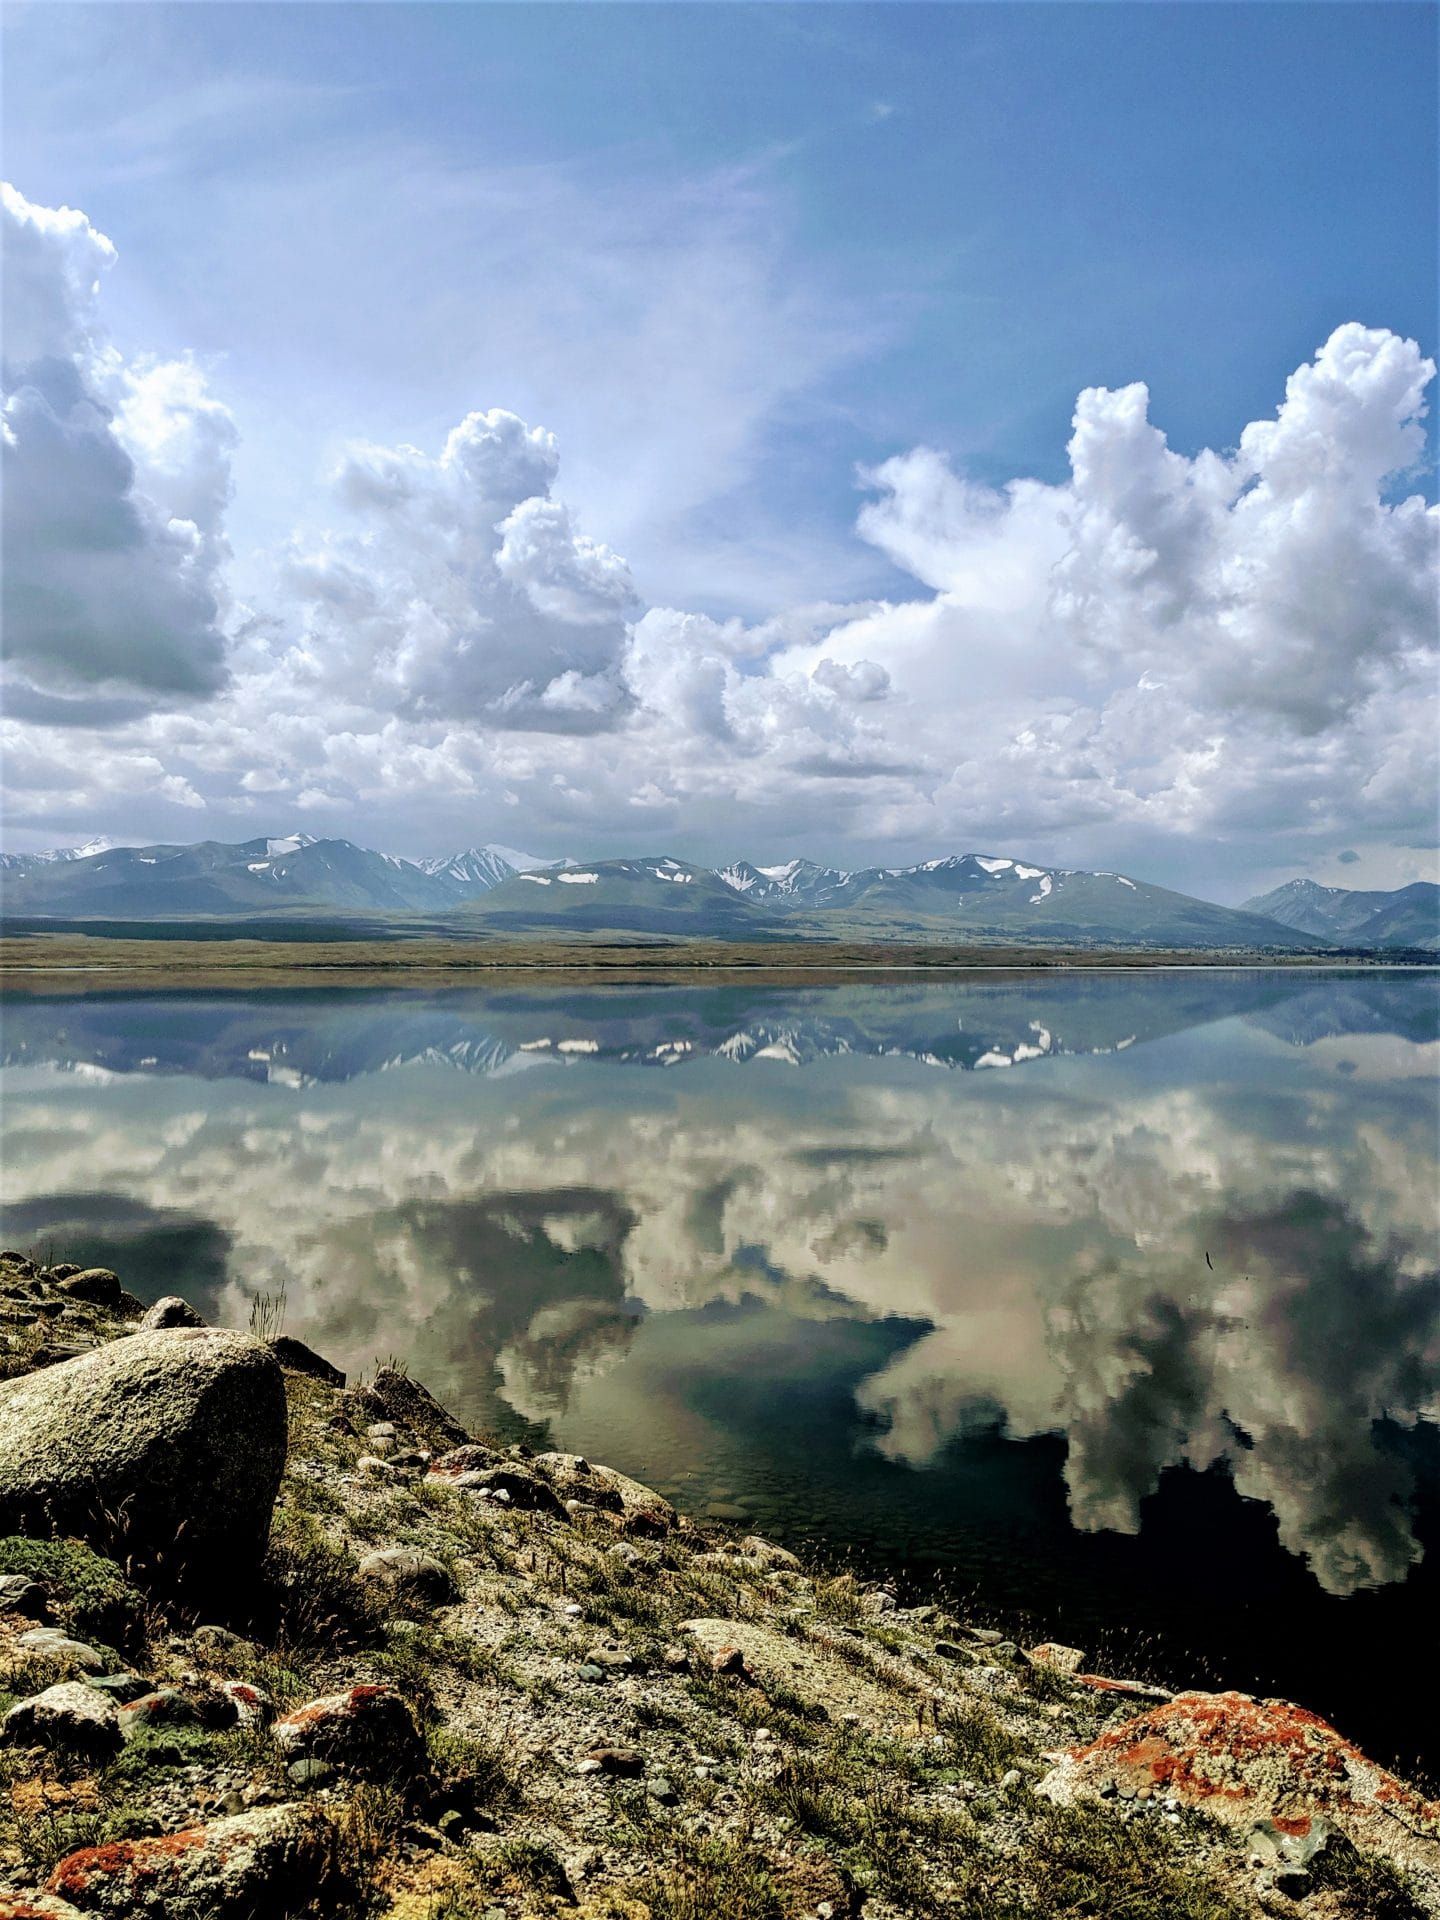 The Altai Mountains reflect off of Khurgan Nuur, a lake formed after the recession of glaciers thousands of years ago left a huge hollow that then filled with glacial melt.